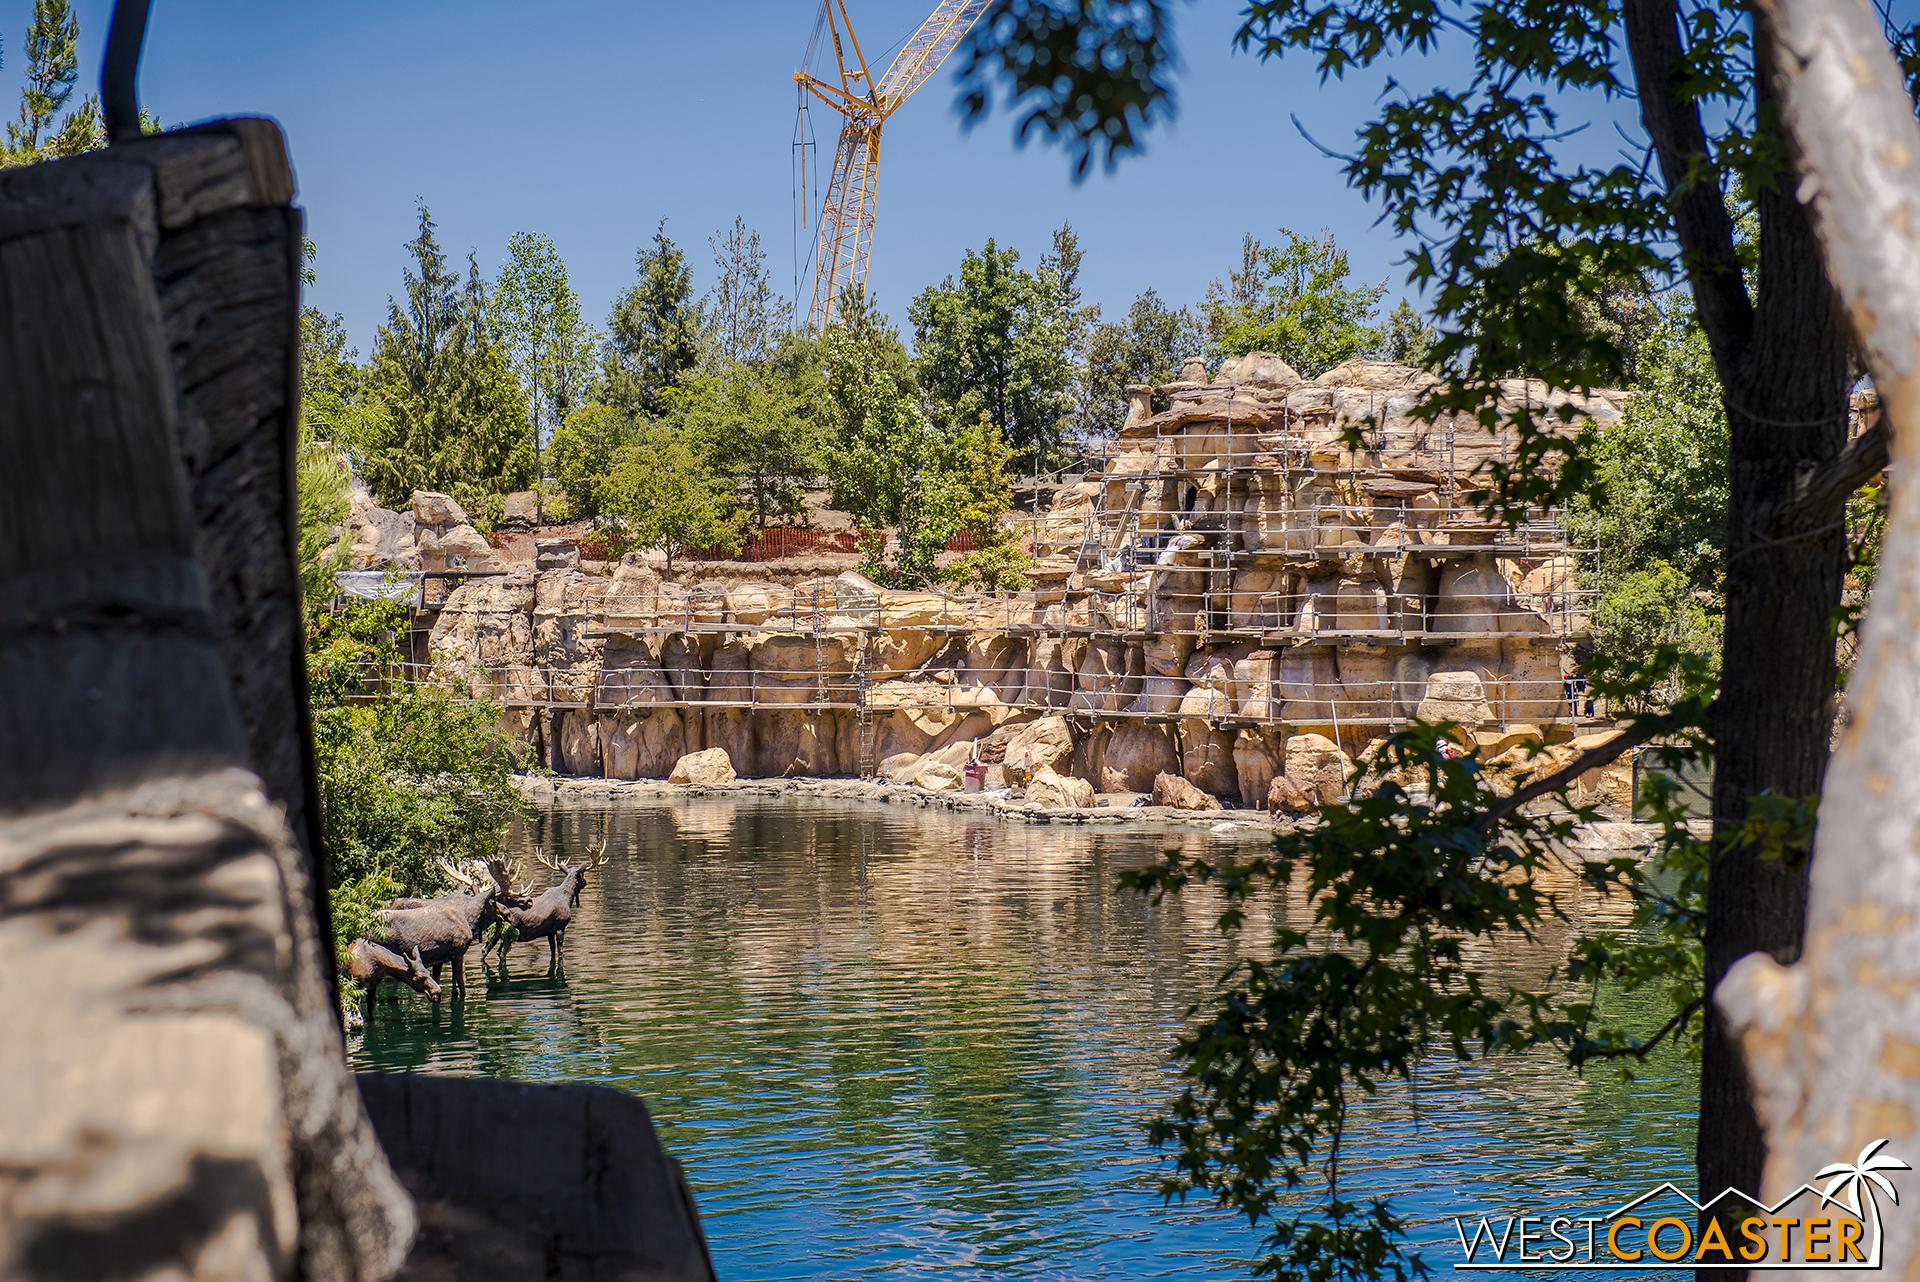  The re-routed part of the Rivers of America is getting new rockwork to blend into the Big Thunder Trail portion. 